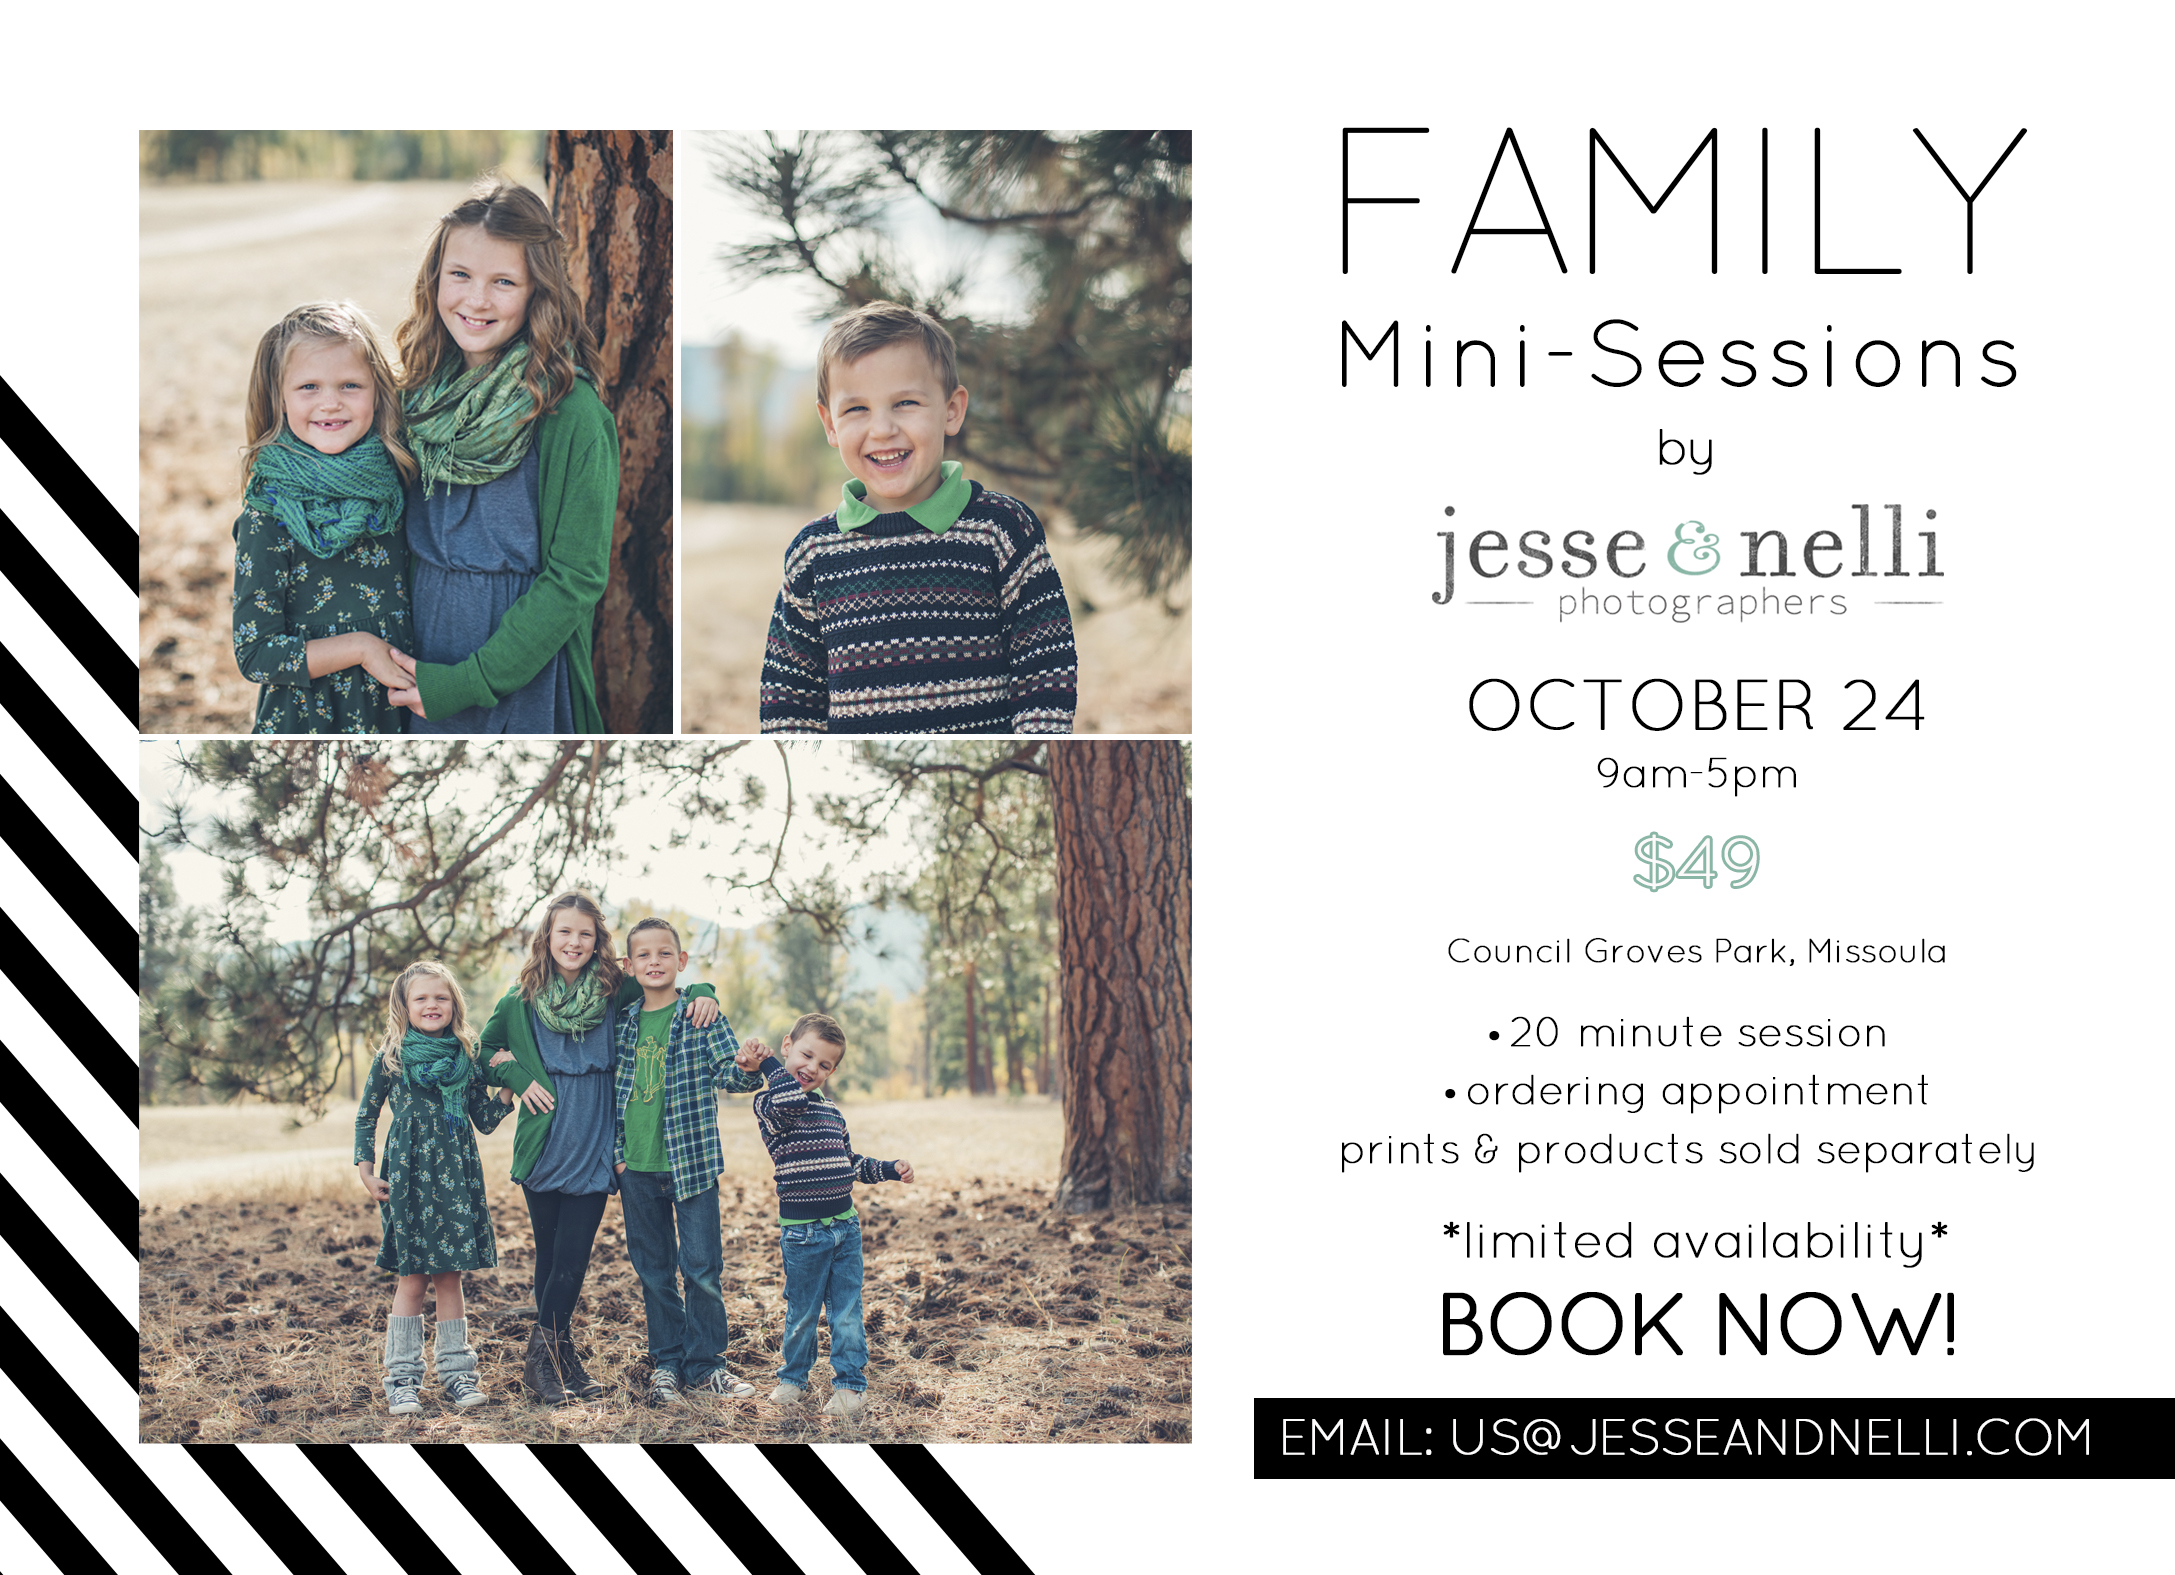 Holiday Mini-Sessions!